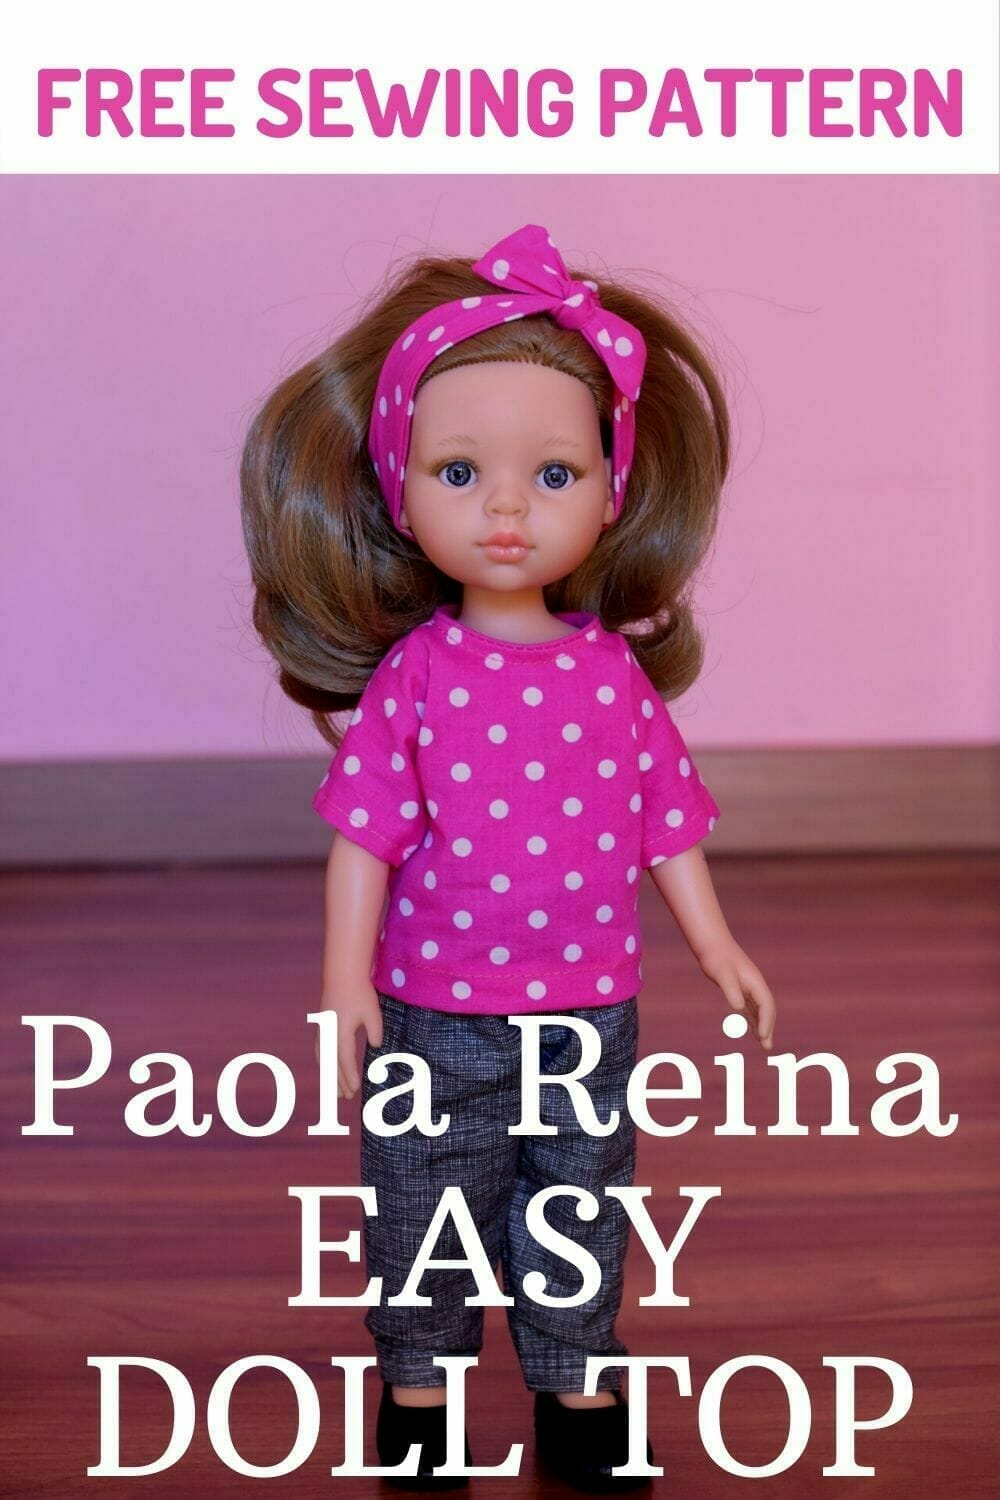 Easy Paola Reina doll top tutorialand free sewing pattern